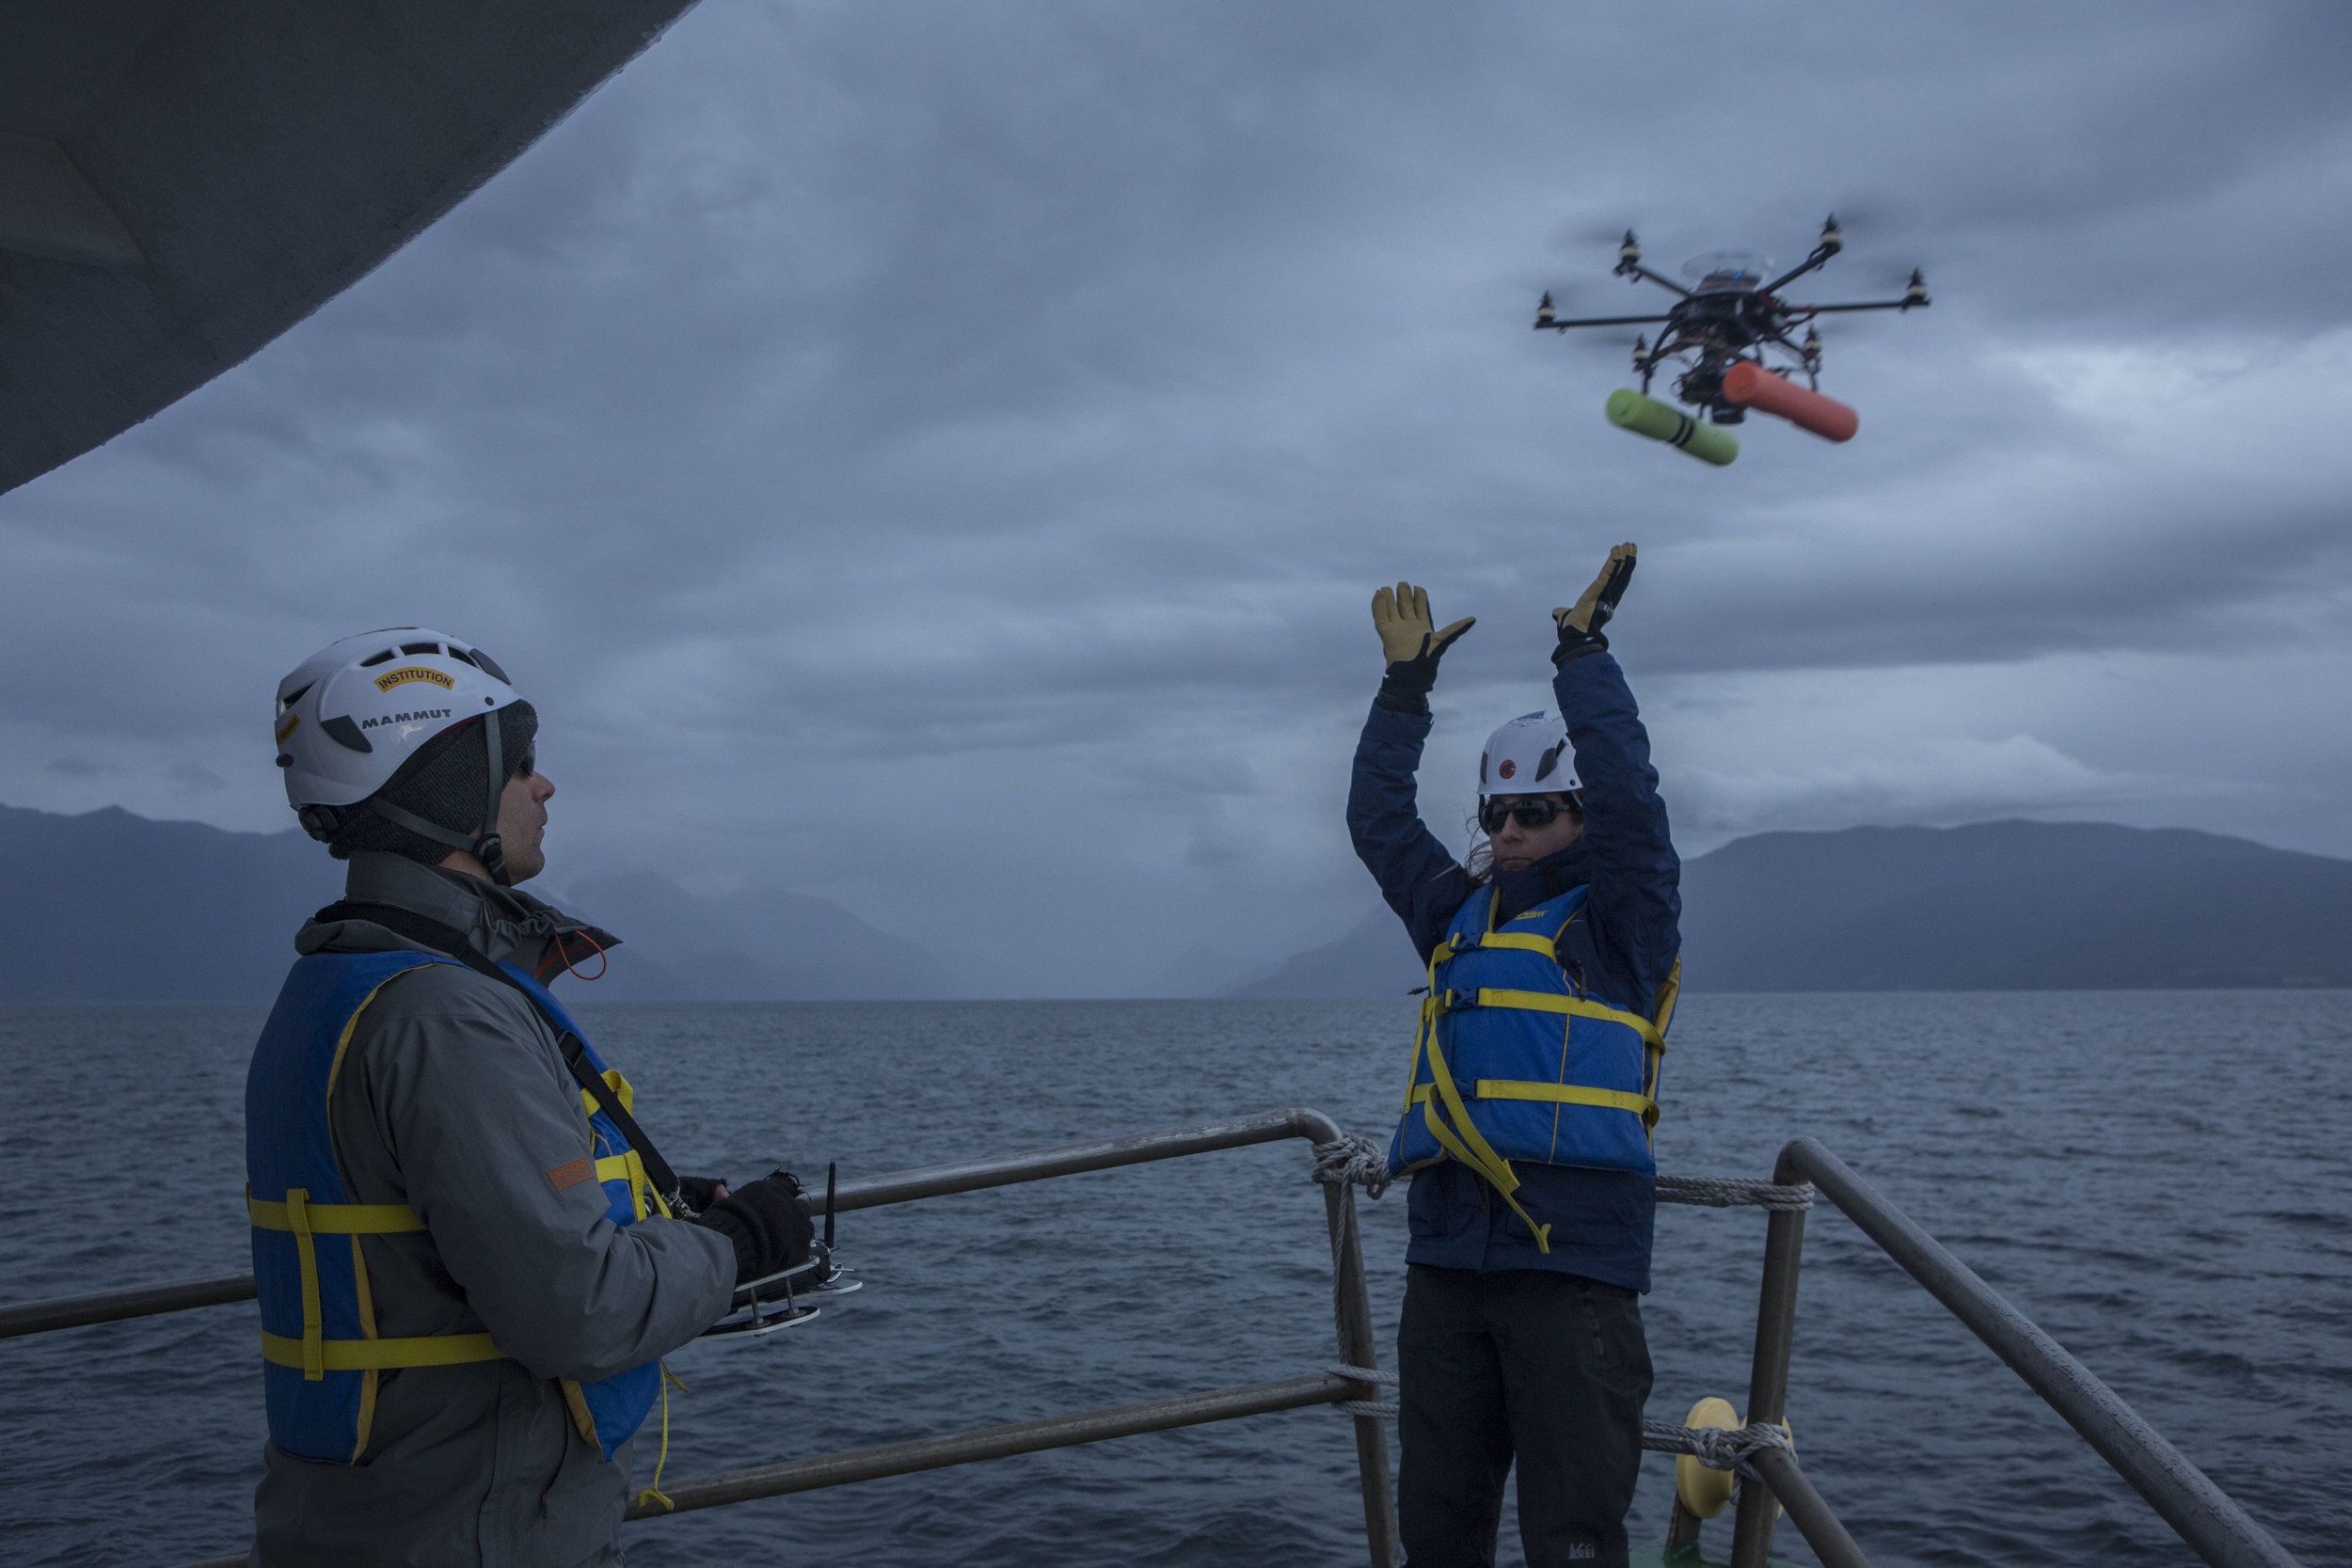                  Measuring blue whales in Chilean Patagonia using drones:  Matthew S. Leslie (Smithsonian Institution) and Carolyn Miller (Woods Hole Oceanographic Institution) deploy the APH-22 hexacopter for measuring body metrics of Chilean pygmy 